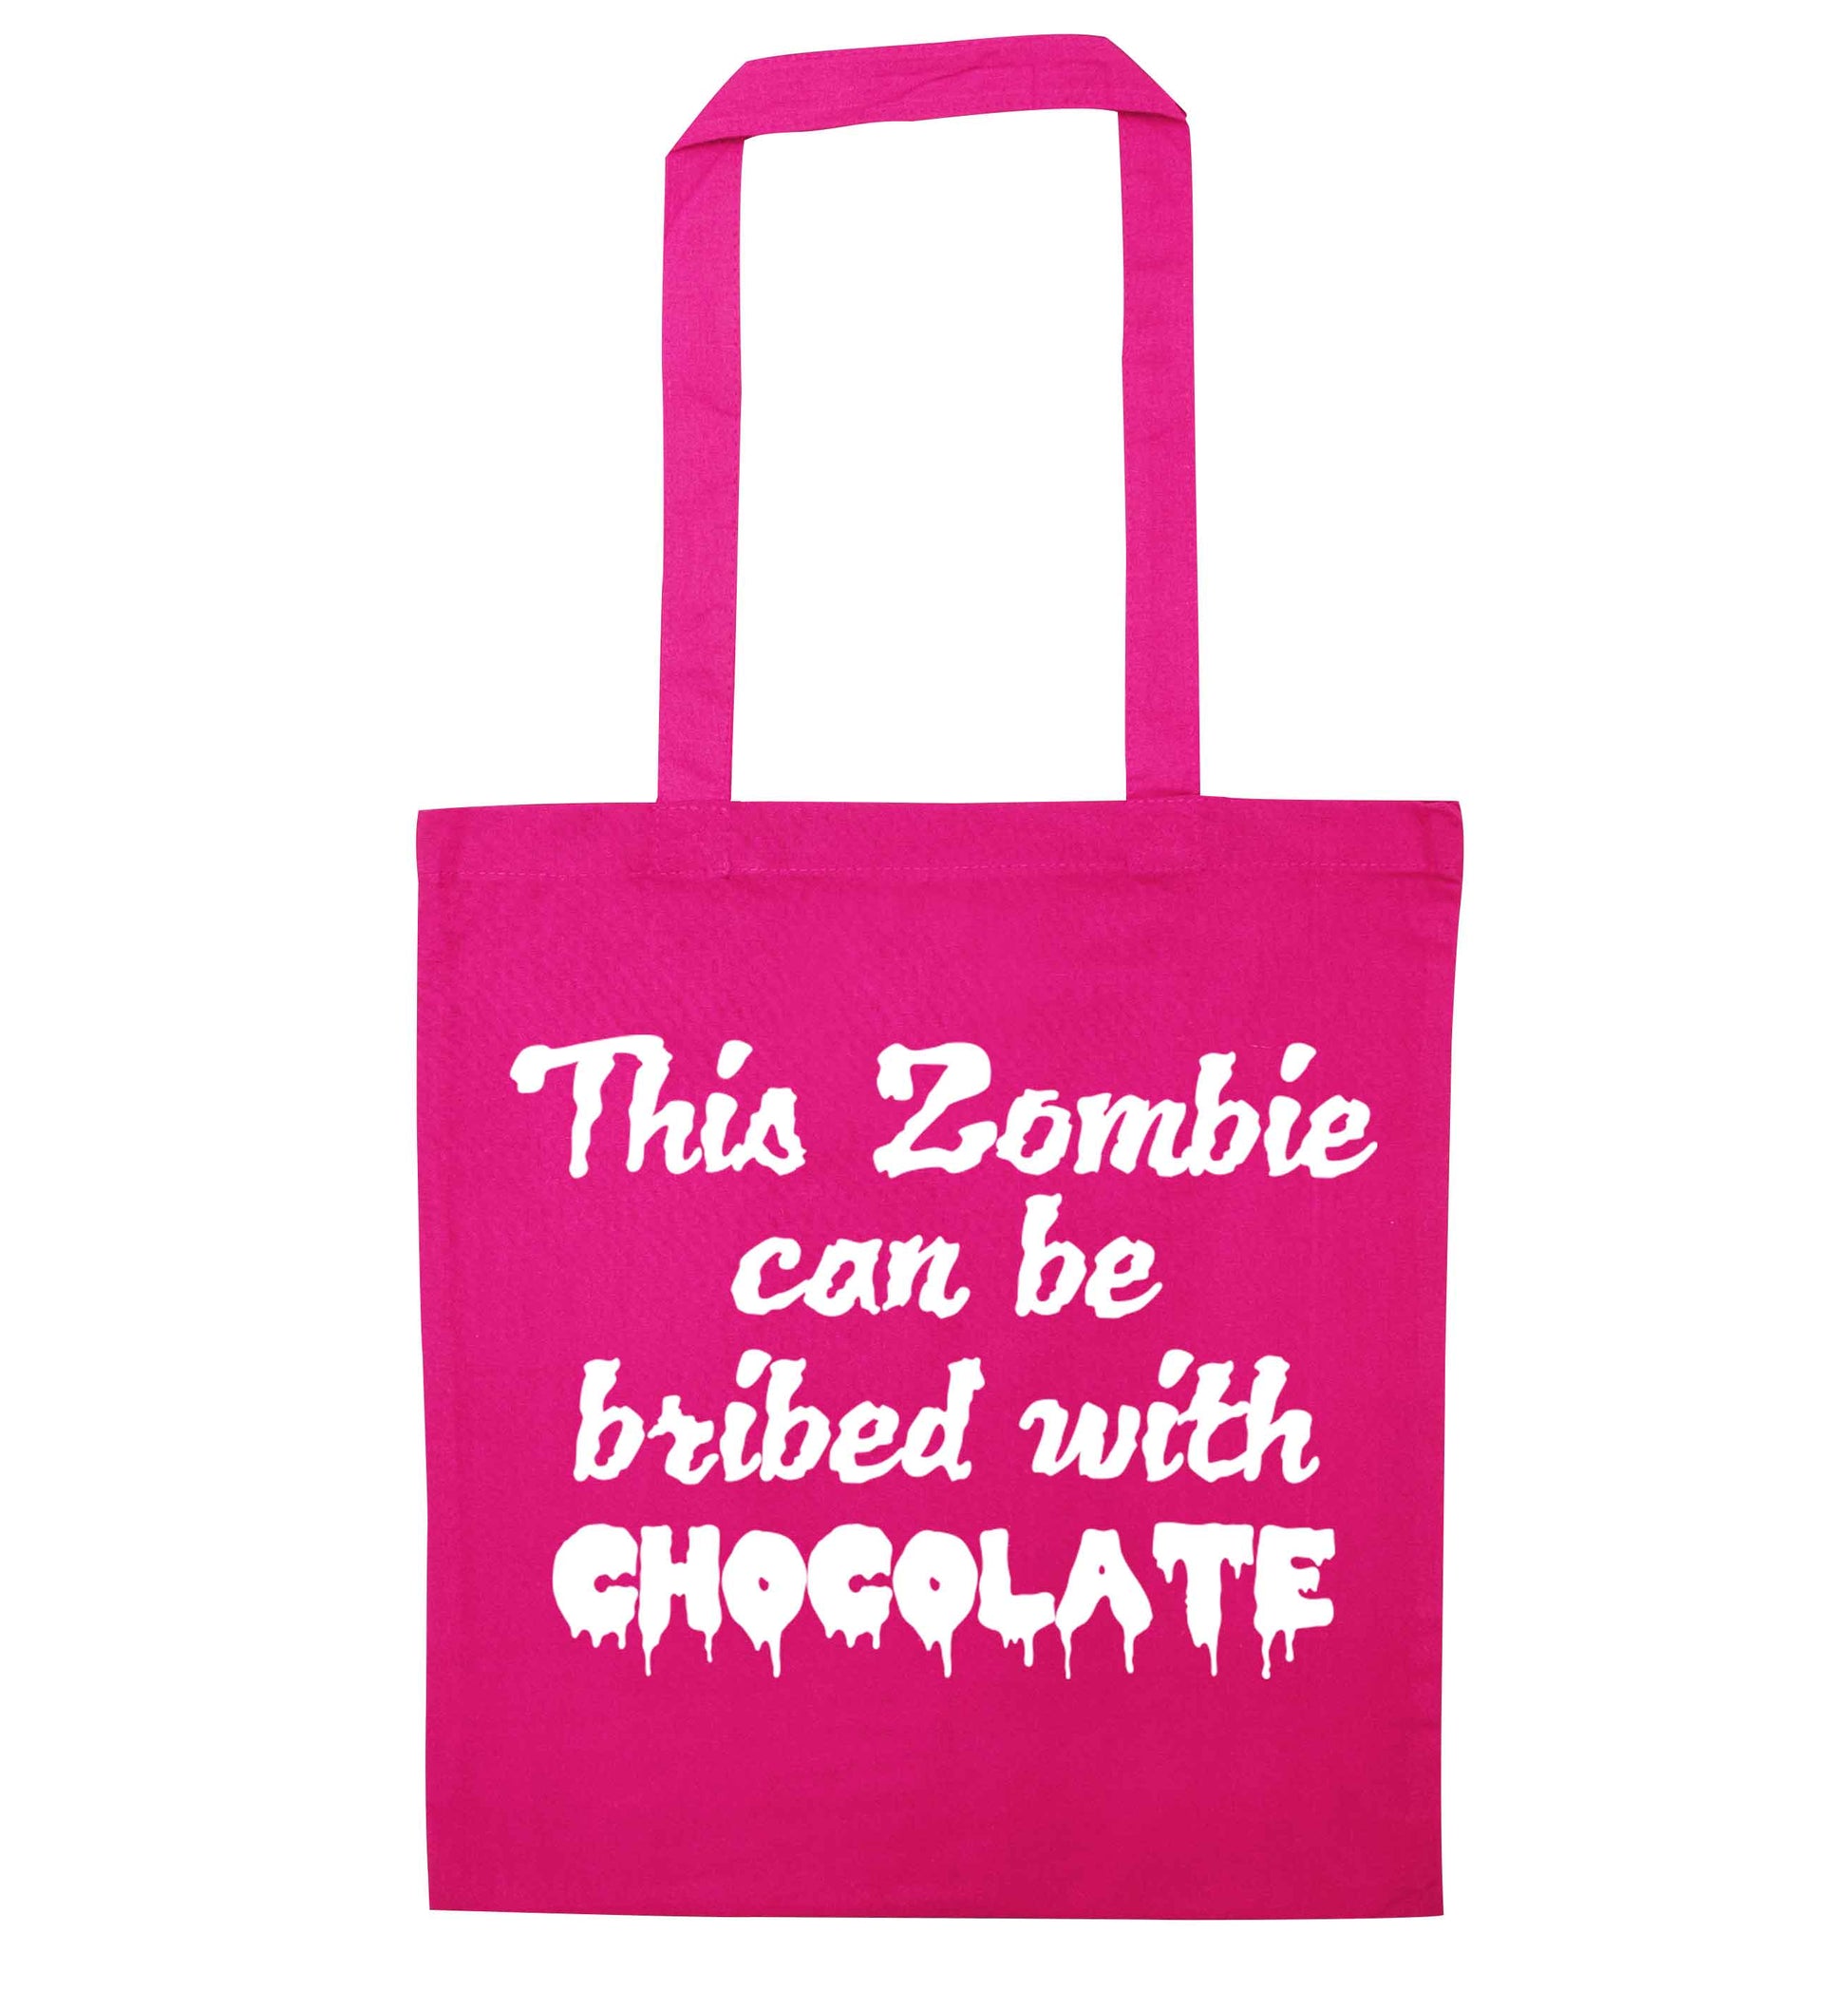 This zombie can be bribed with chocolate pink tote bag